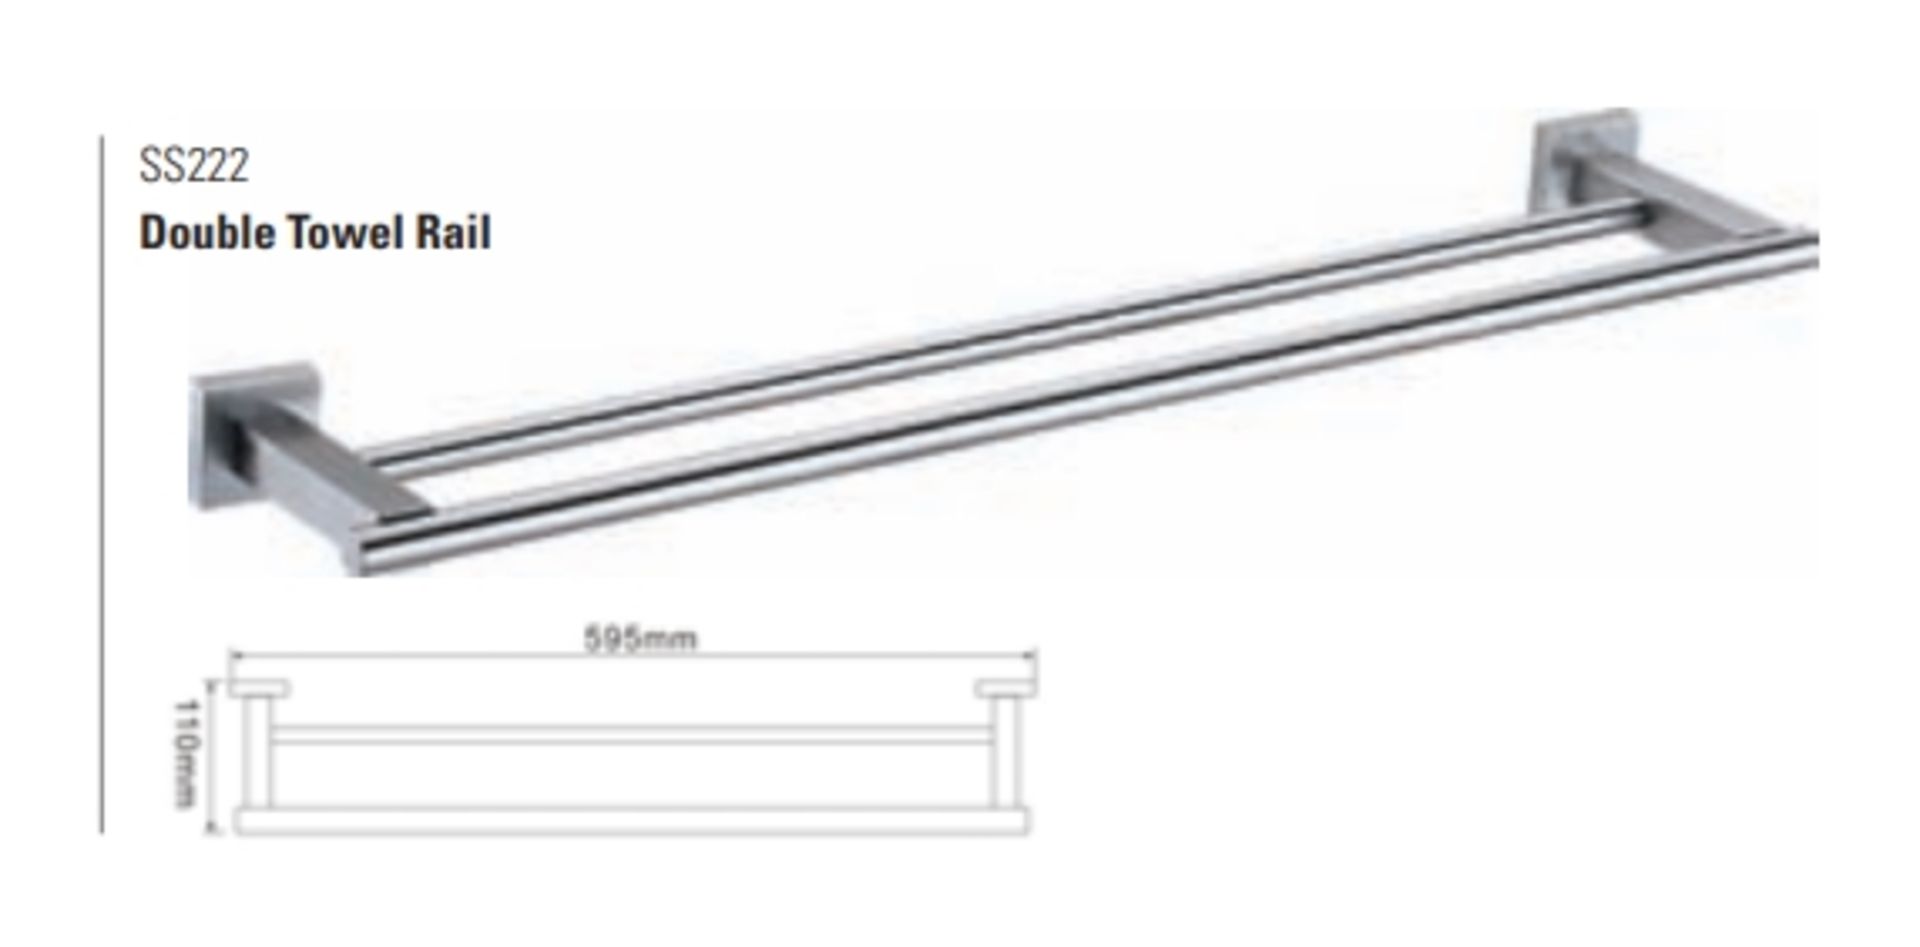 1 x Stonearth Double Towel Rack Rail - Solid Stainless Steel Bathroom Accessory - Brand New & - Image 2 of 3